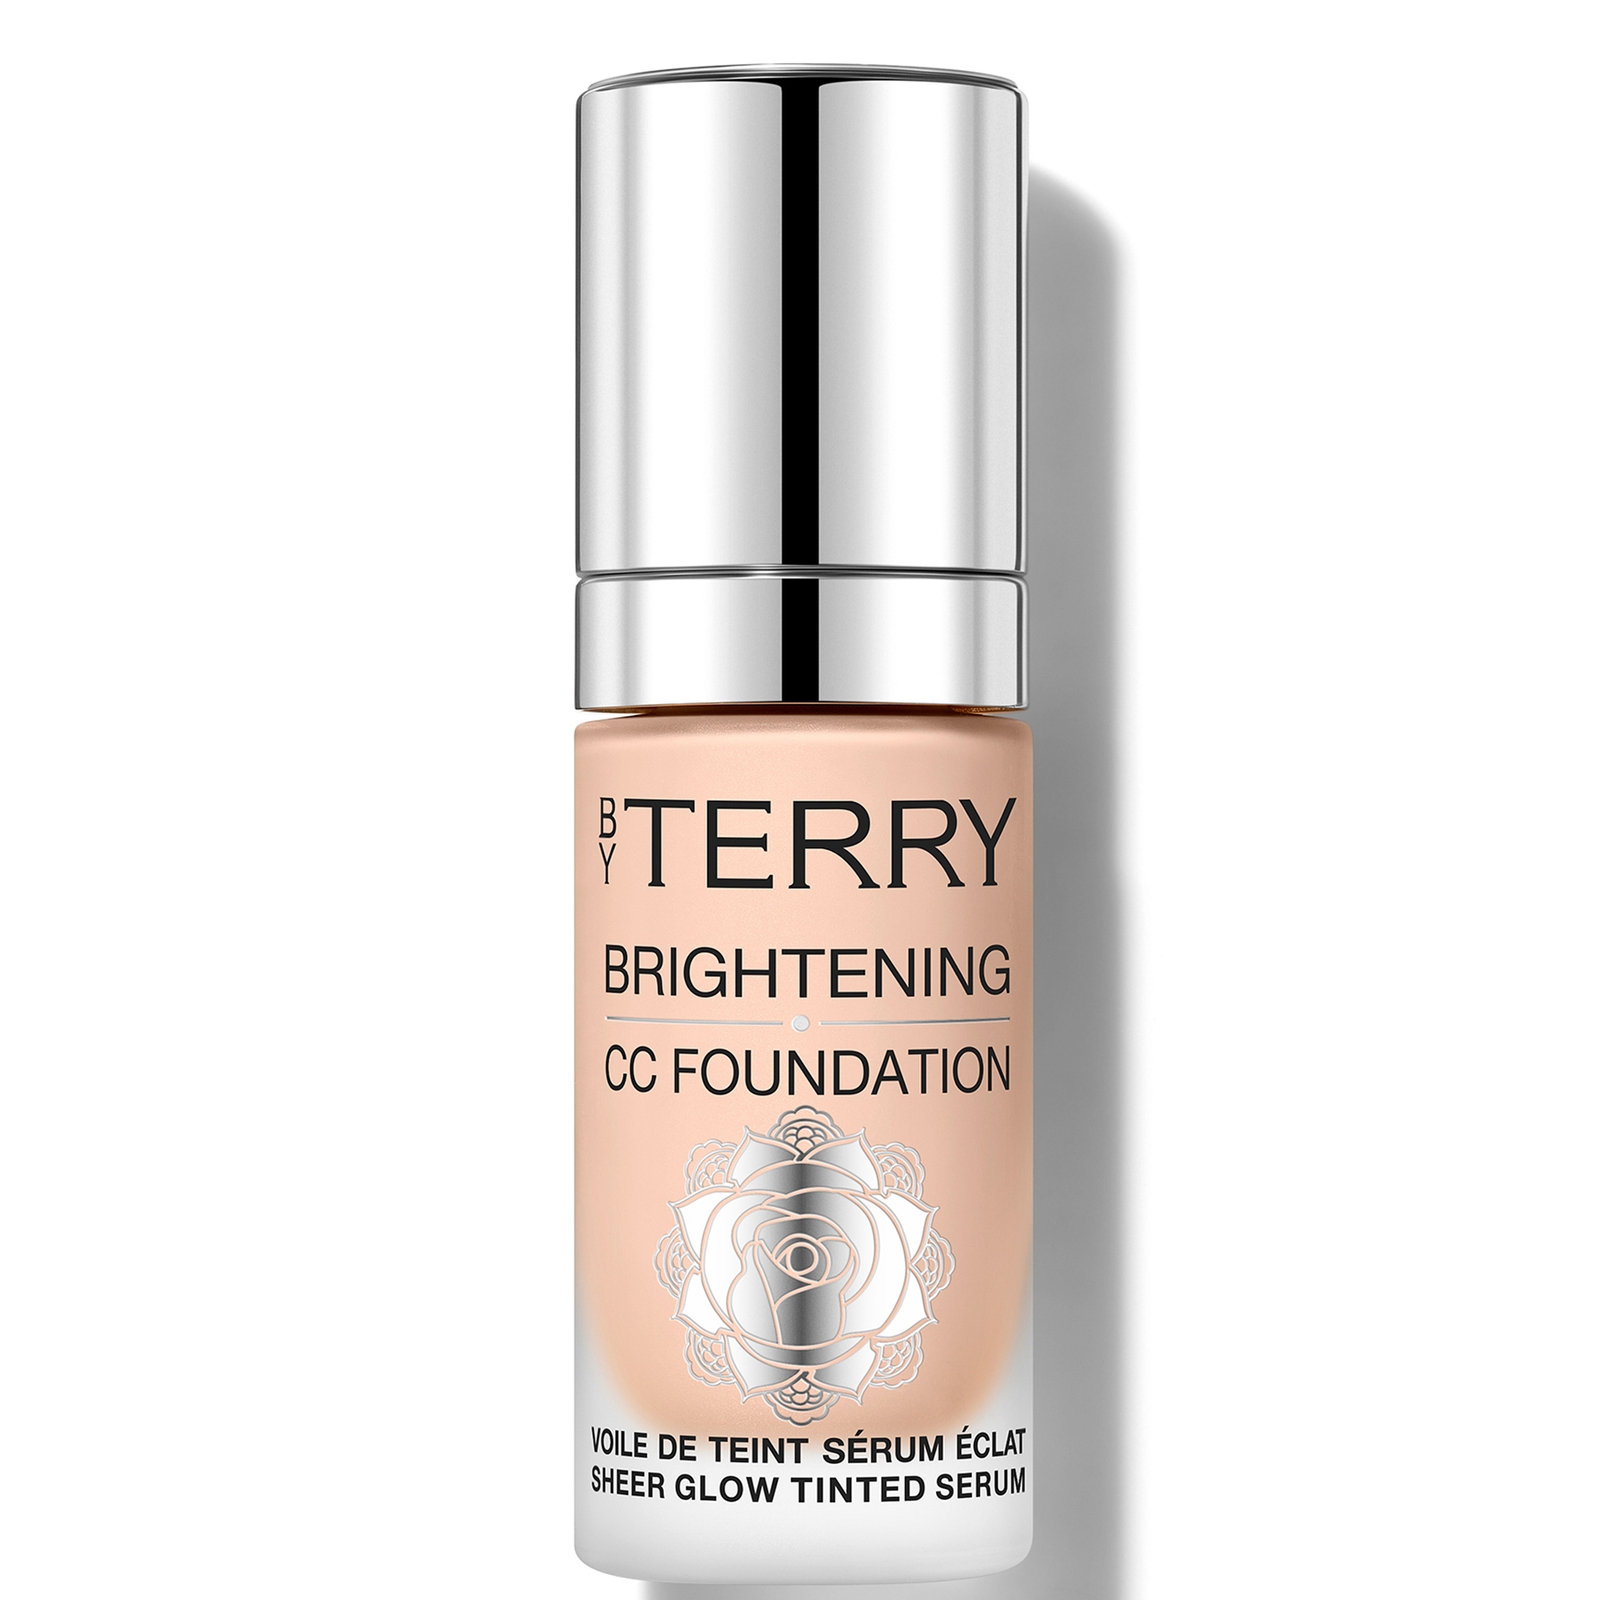 By Terry Brightening Cc Foundation 30ml (various Shades) - 2c - Light Cool In White